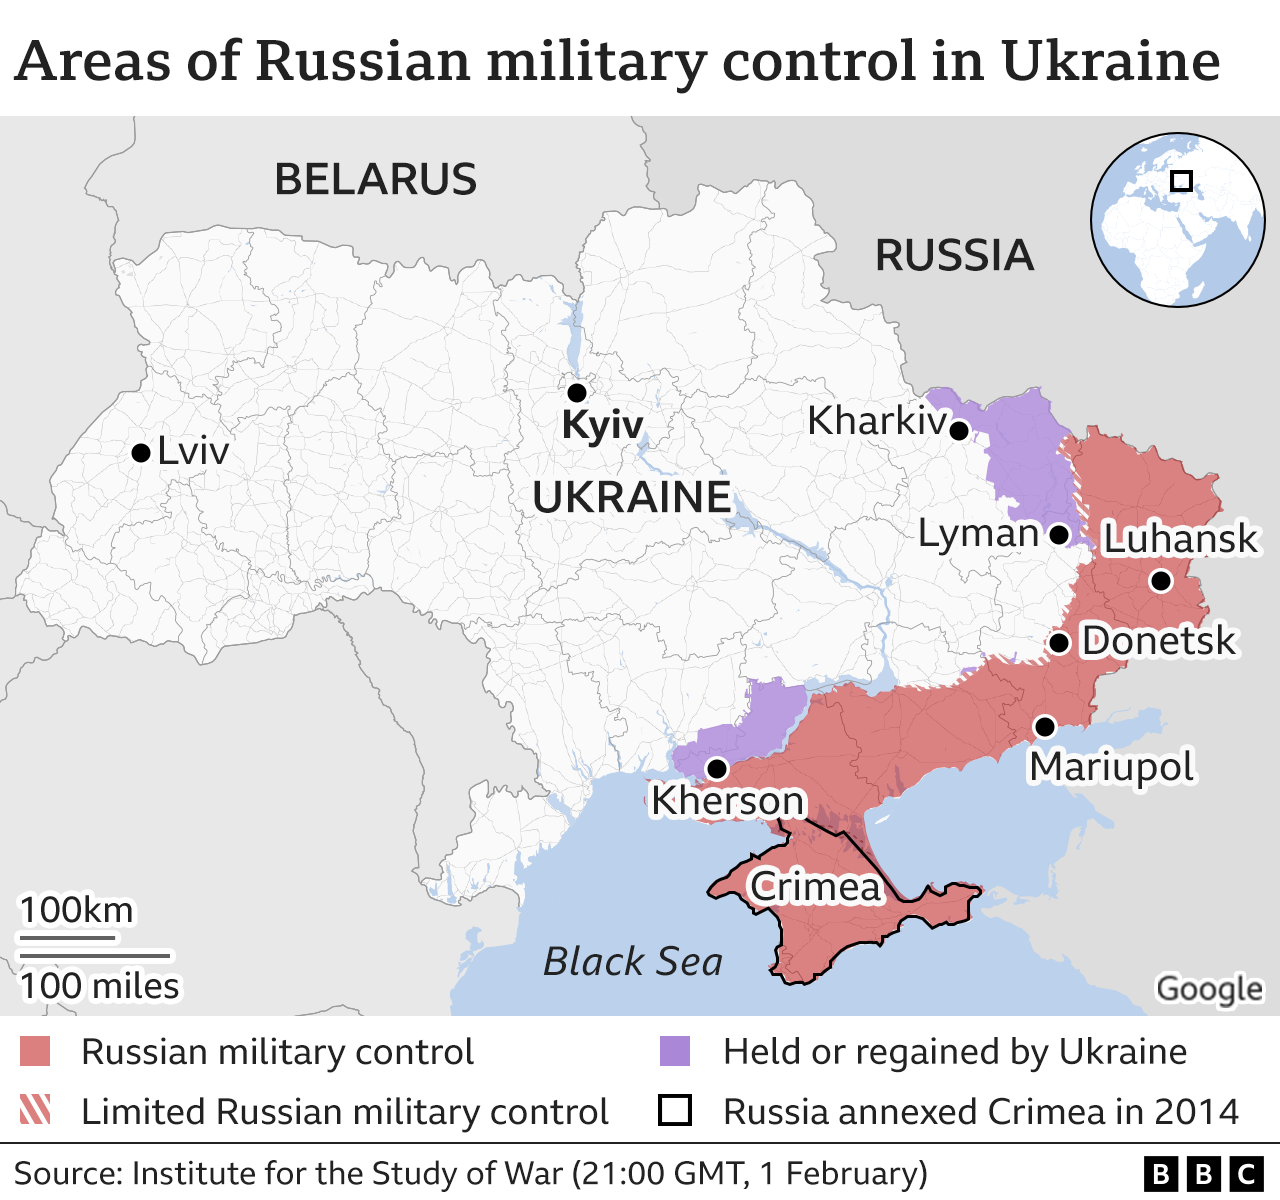 A BBC graphic showing areas of Russian control